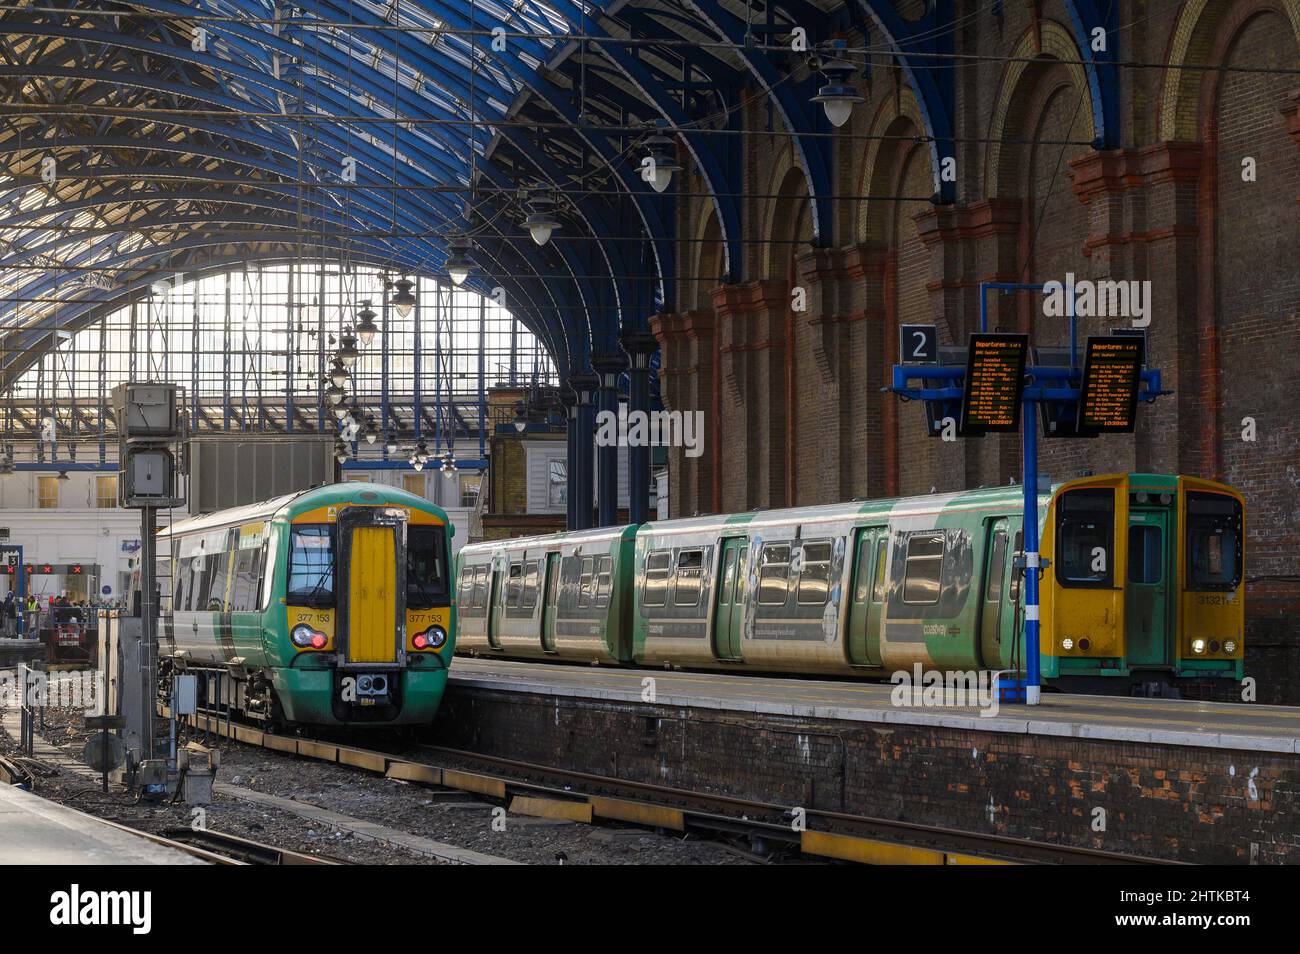 Passenger trains in Southern livery waiting at platforms, Brighton Railway Station, England. Stock Photo